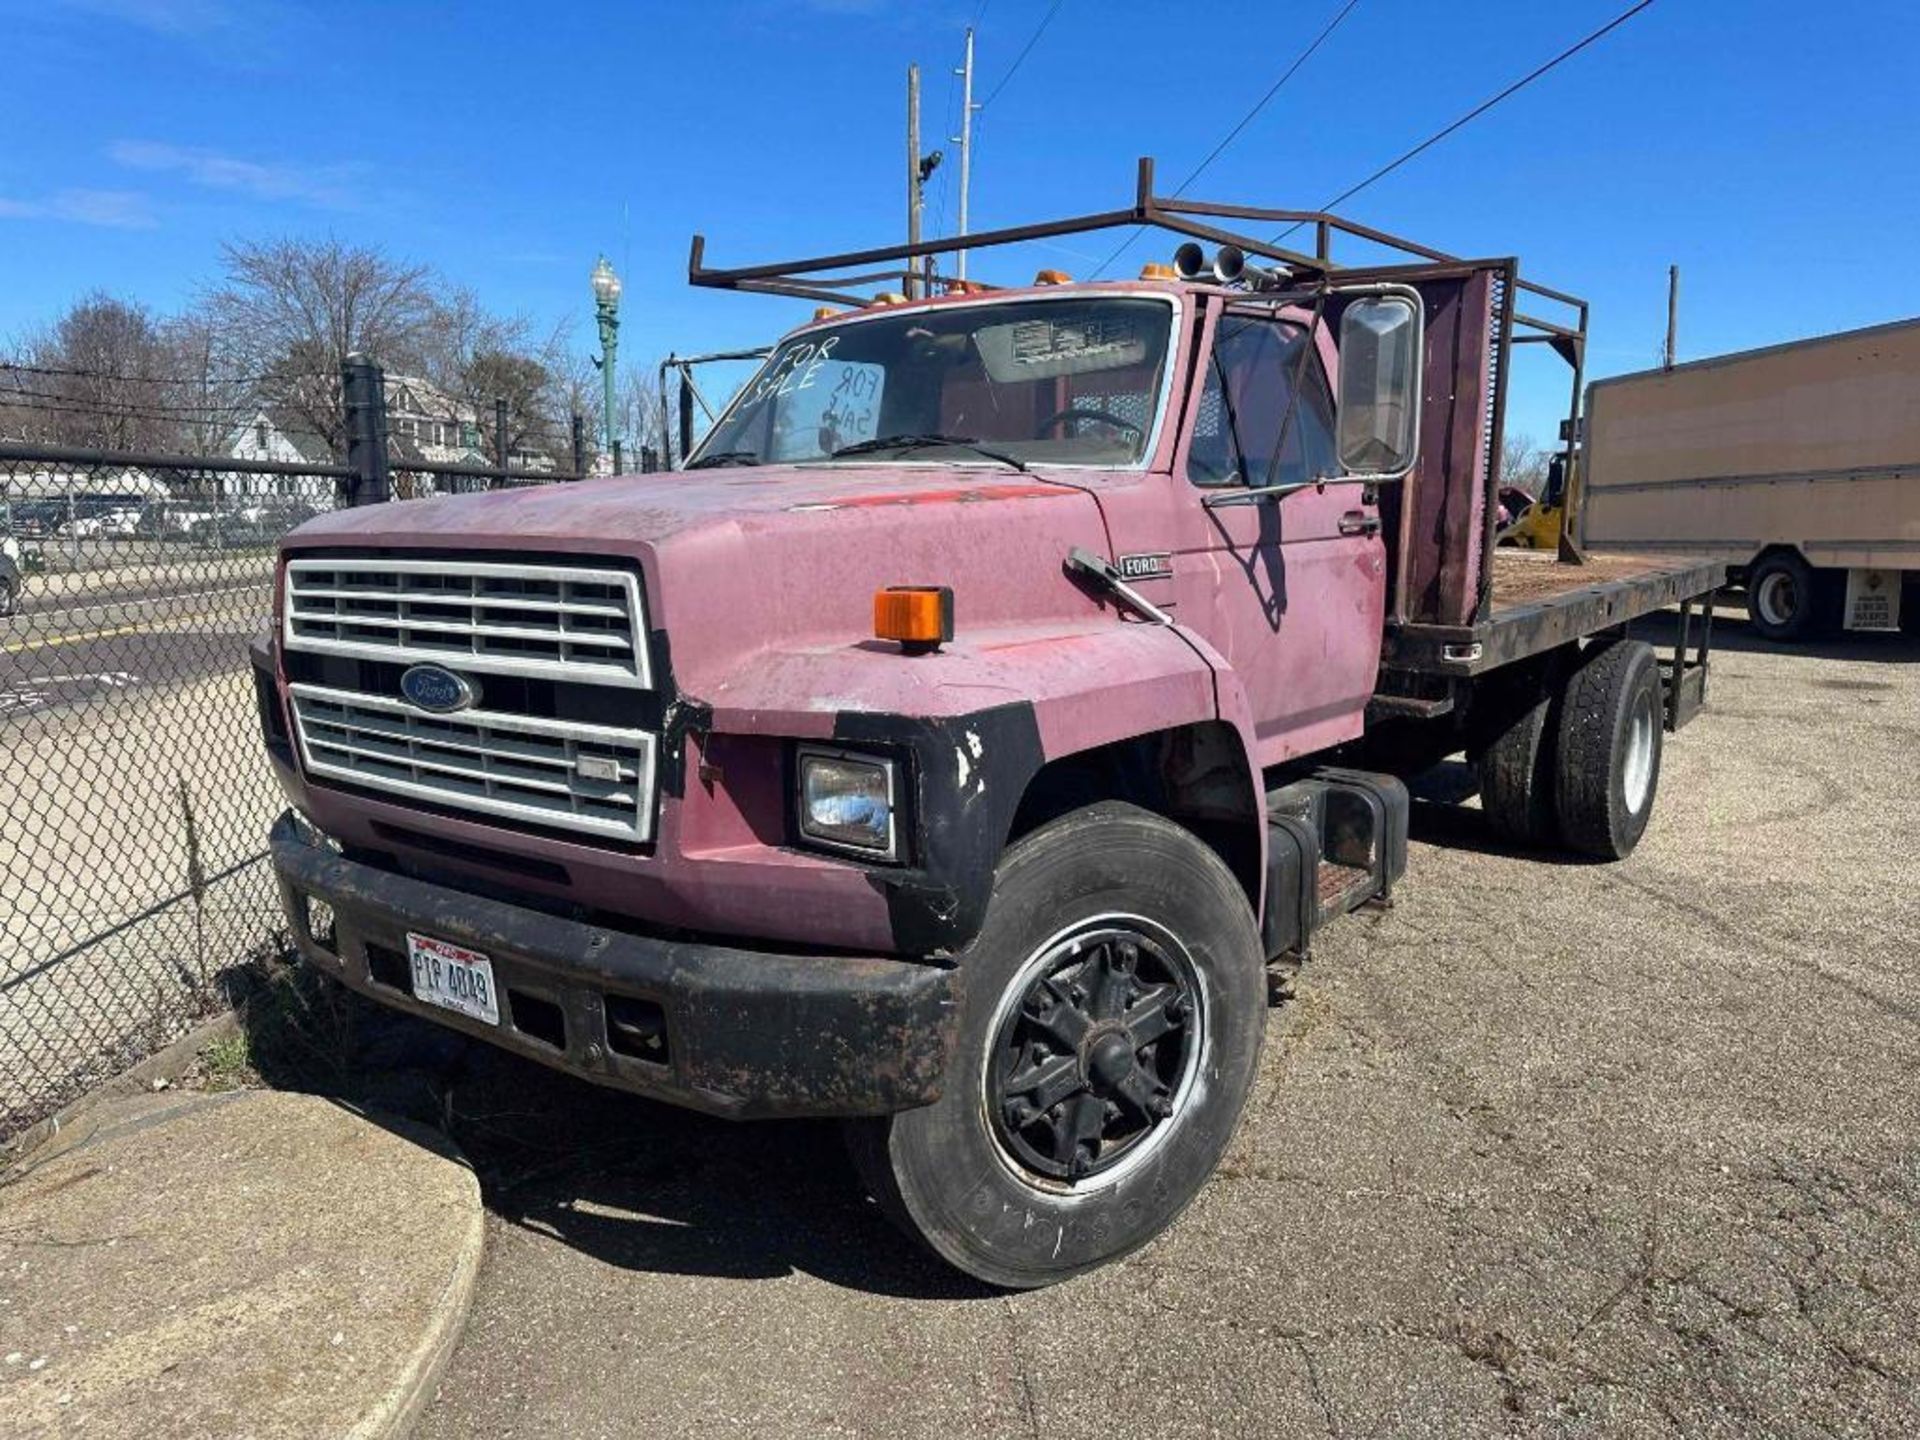 1986 Ford F-700 Diesel Flatbed Truck (located off-site, please read description) - Image 2 of 19